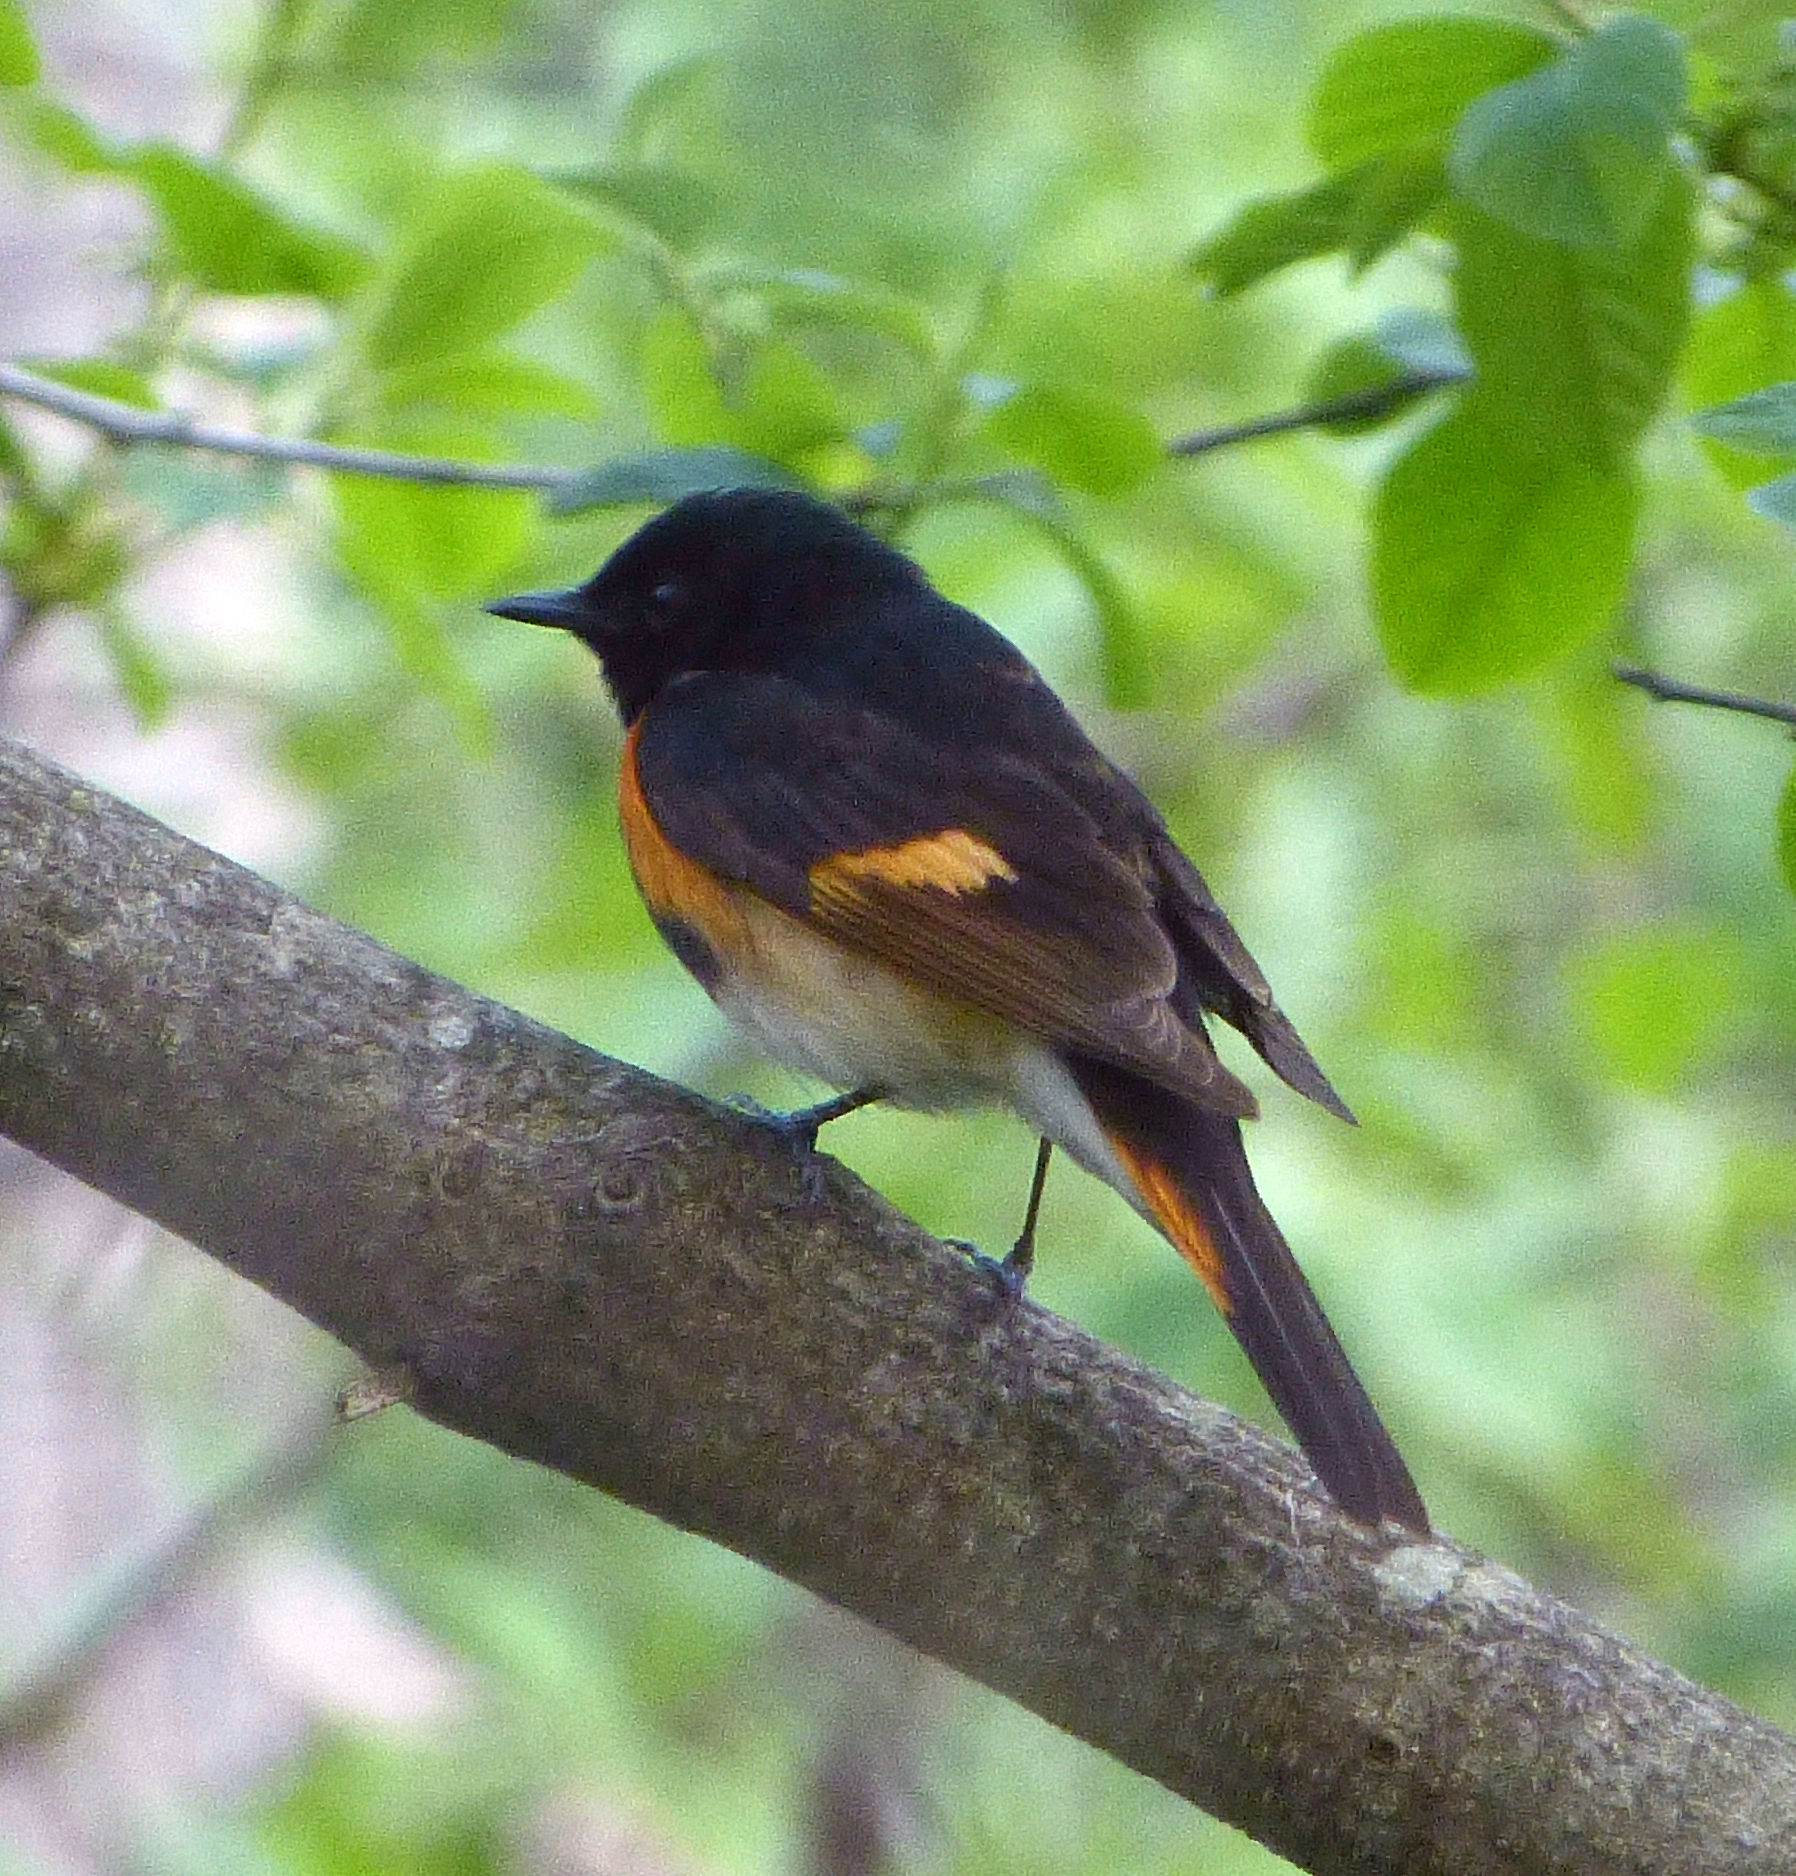 American Redstart, male. The bird we had today was a less colorful female.